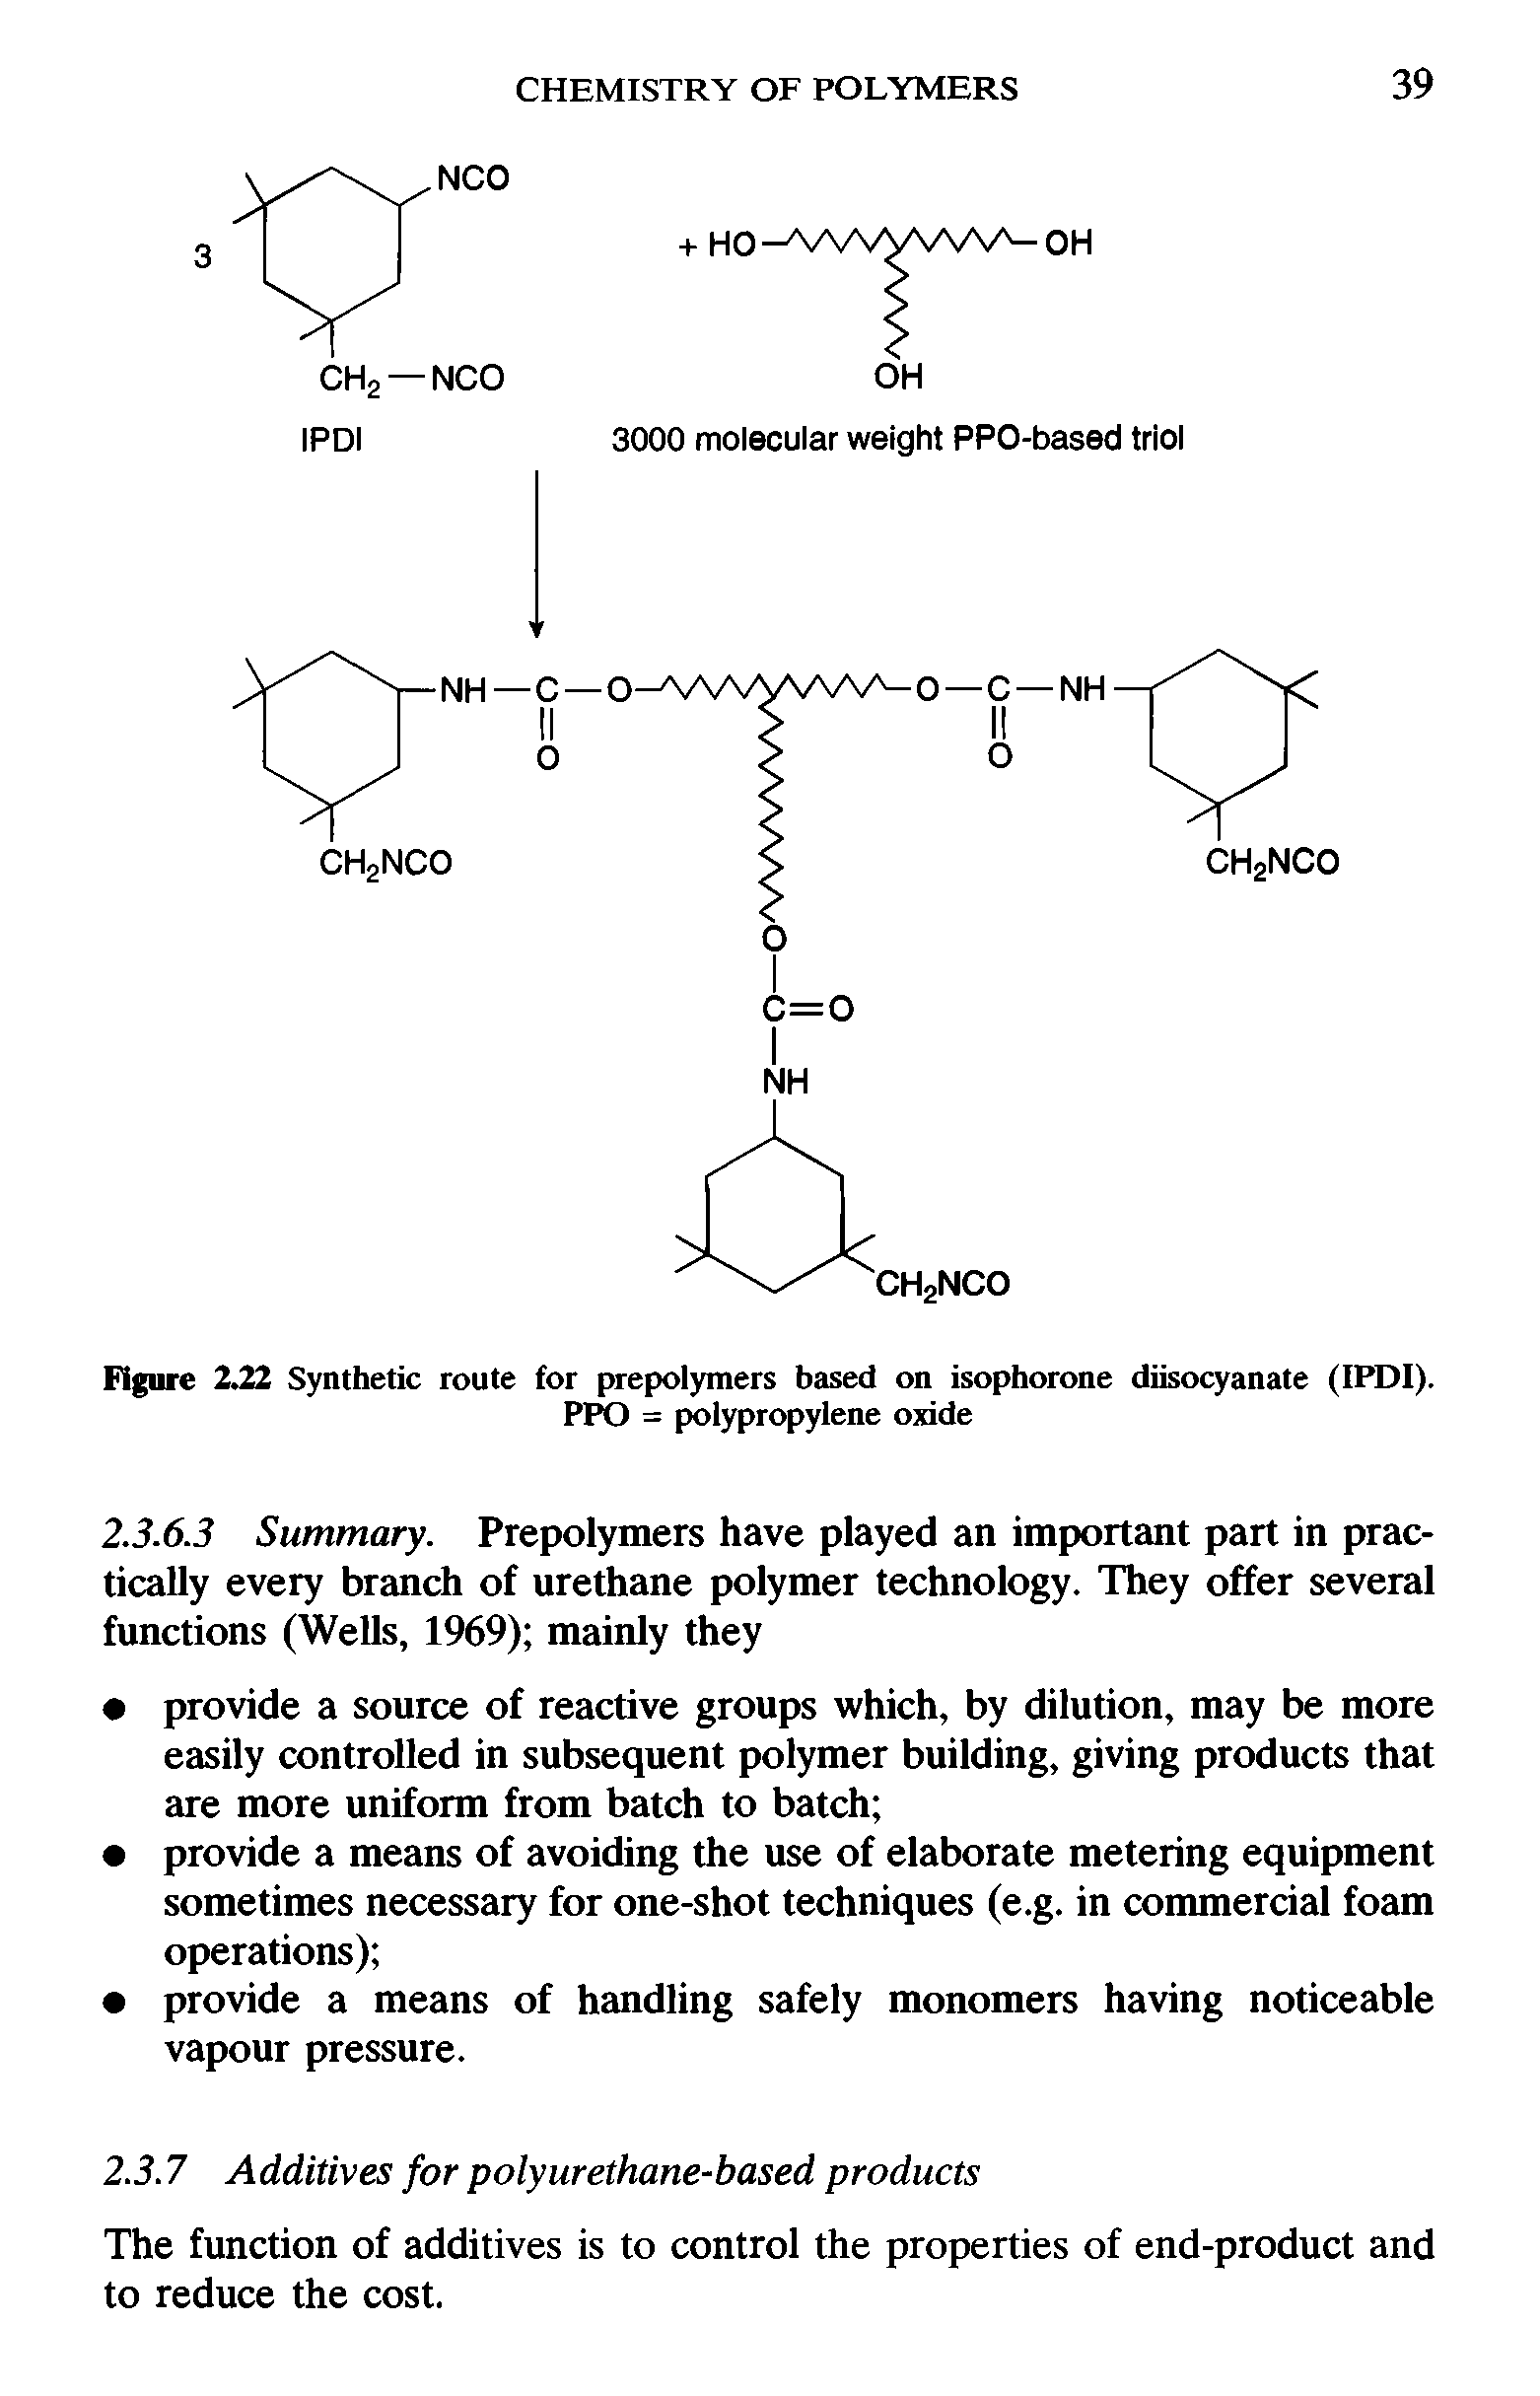 Figure 221 Synthetic route for prepolymers based on isophorone diisocyanate (IPDI).